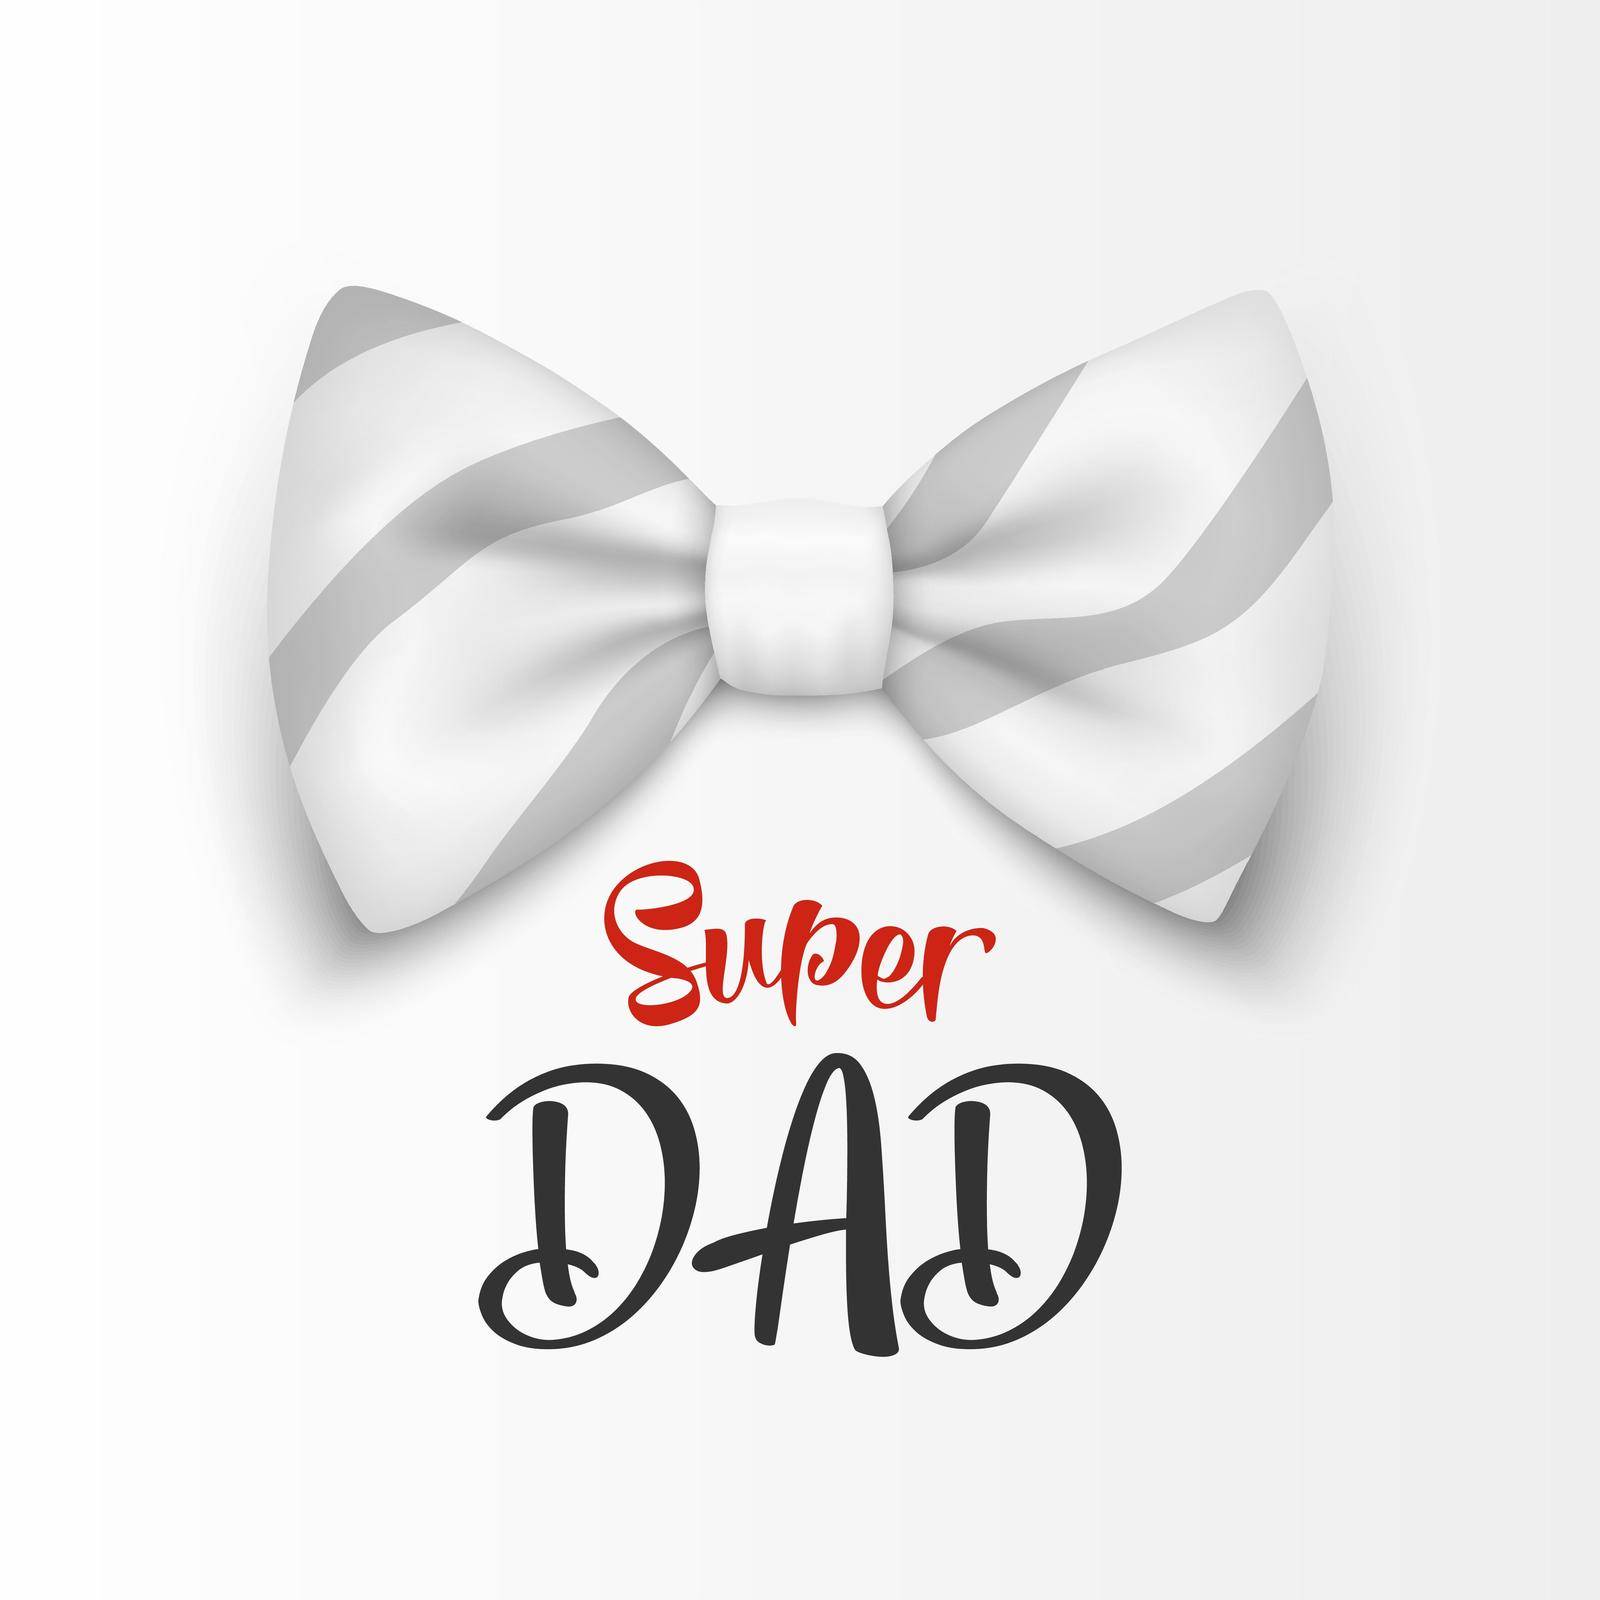 Super Dad. Vector Banner for Father's Day. 3d Realistic Silk White Striped Bow Tie. Glossy Bowtie, Tie Gentleman. Father's Day Holiday Concept. Design Template for Greeting Card, Invitation, Poster.